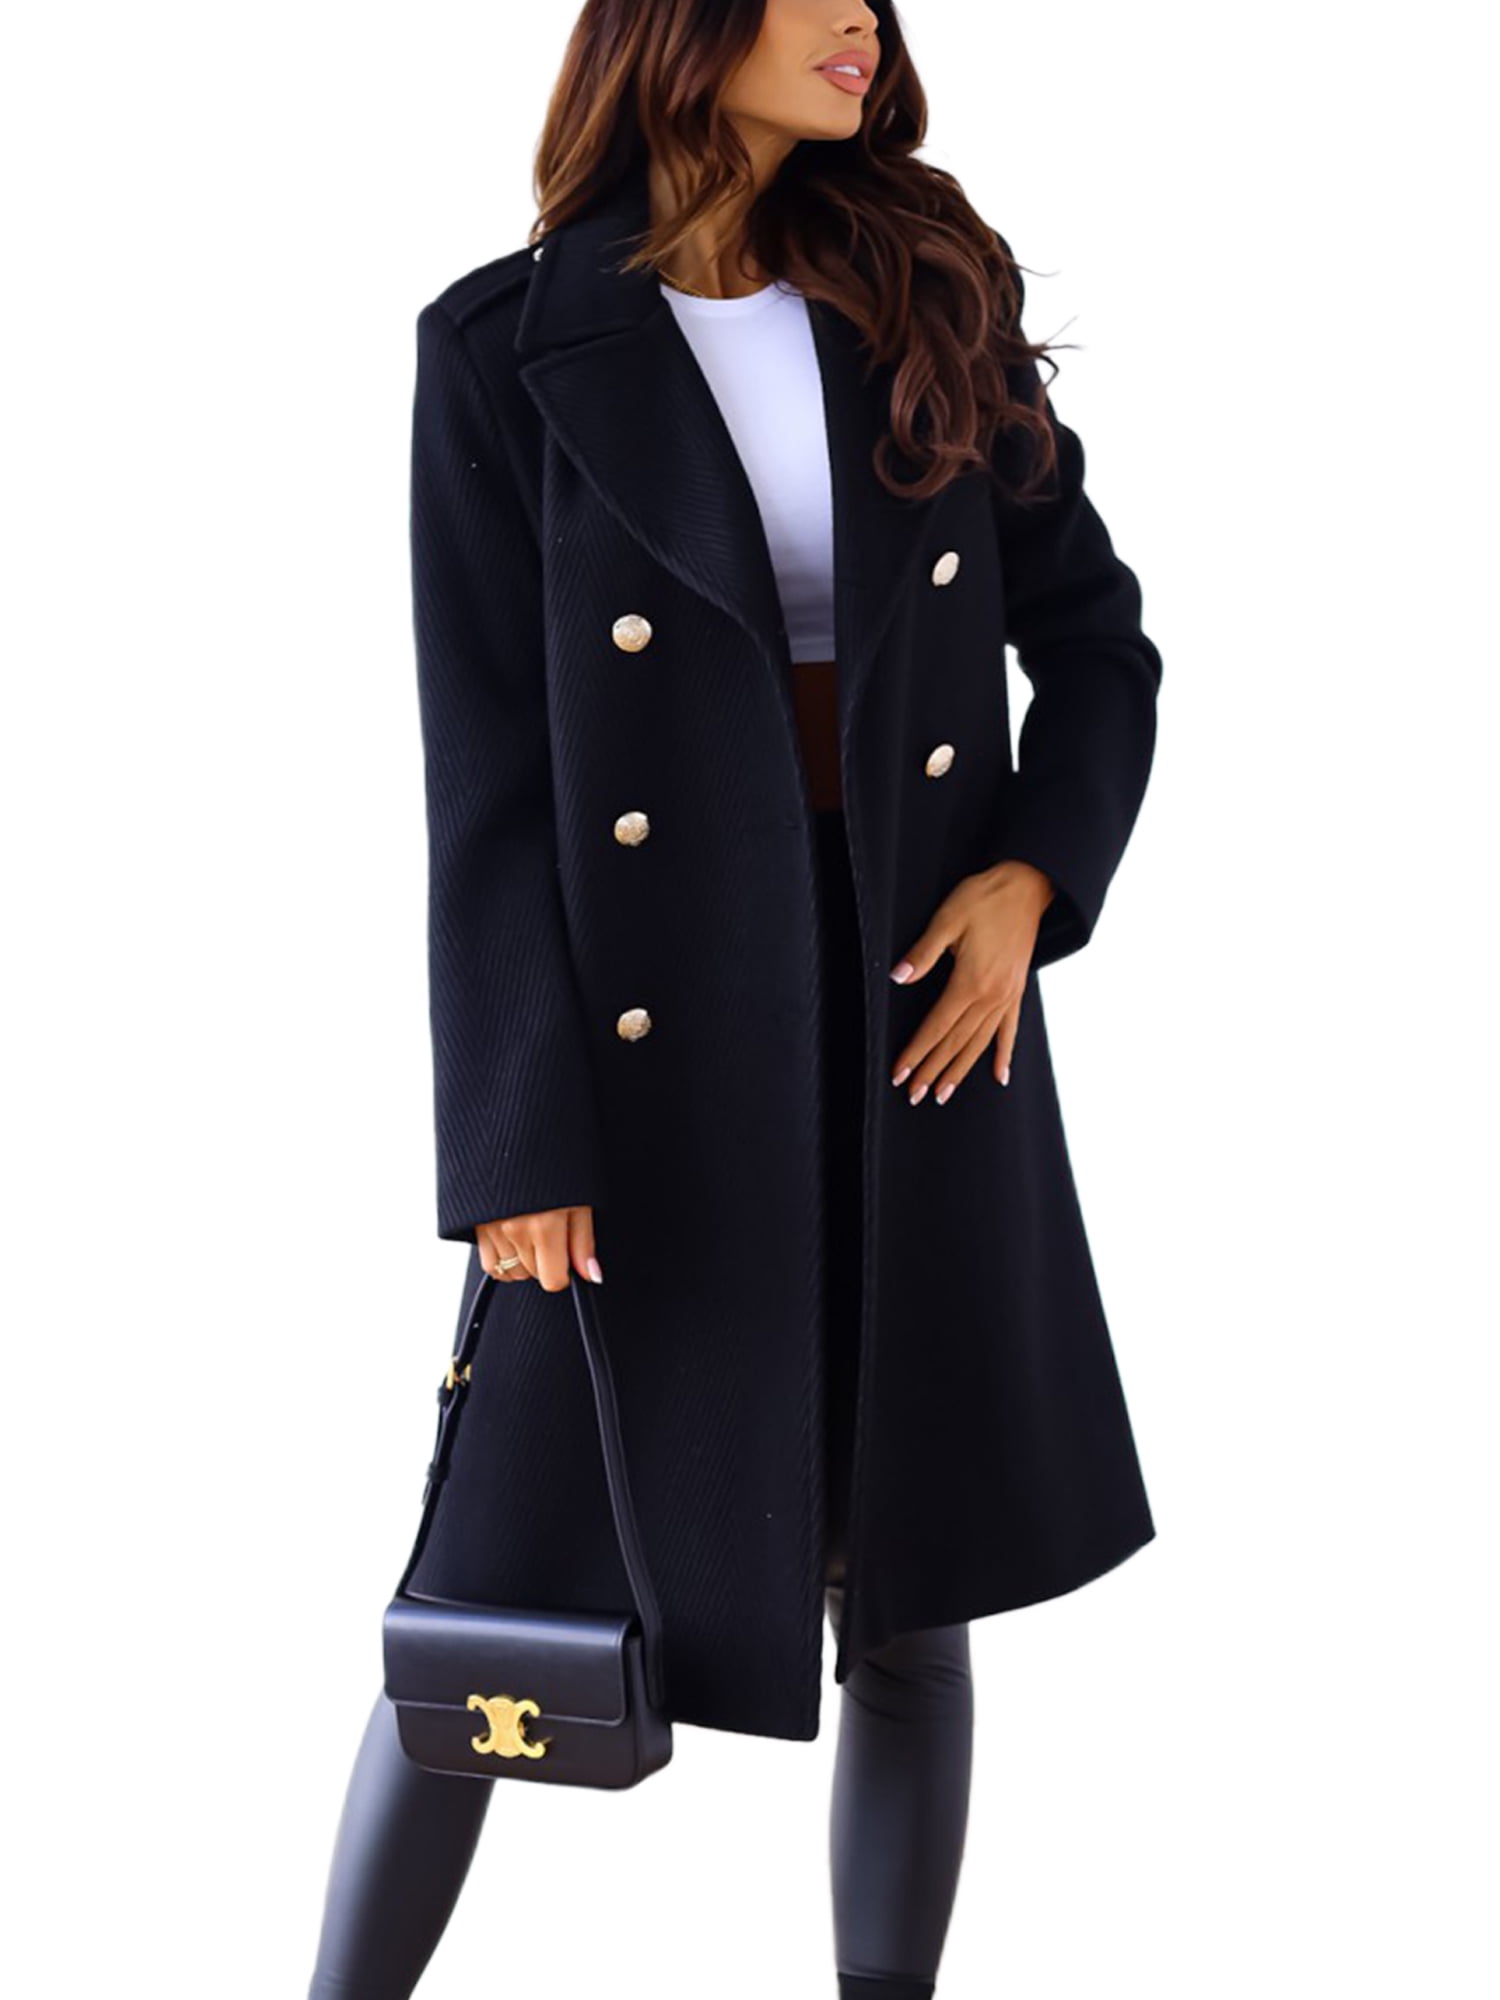 Stylish Black Double Faced Trench Coat Buttons For Women Perfect For Middle  To Long Winter Wear In Autumn And Winter From Biancanne, $216.23